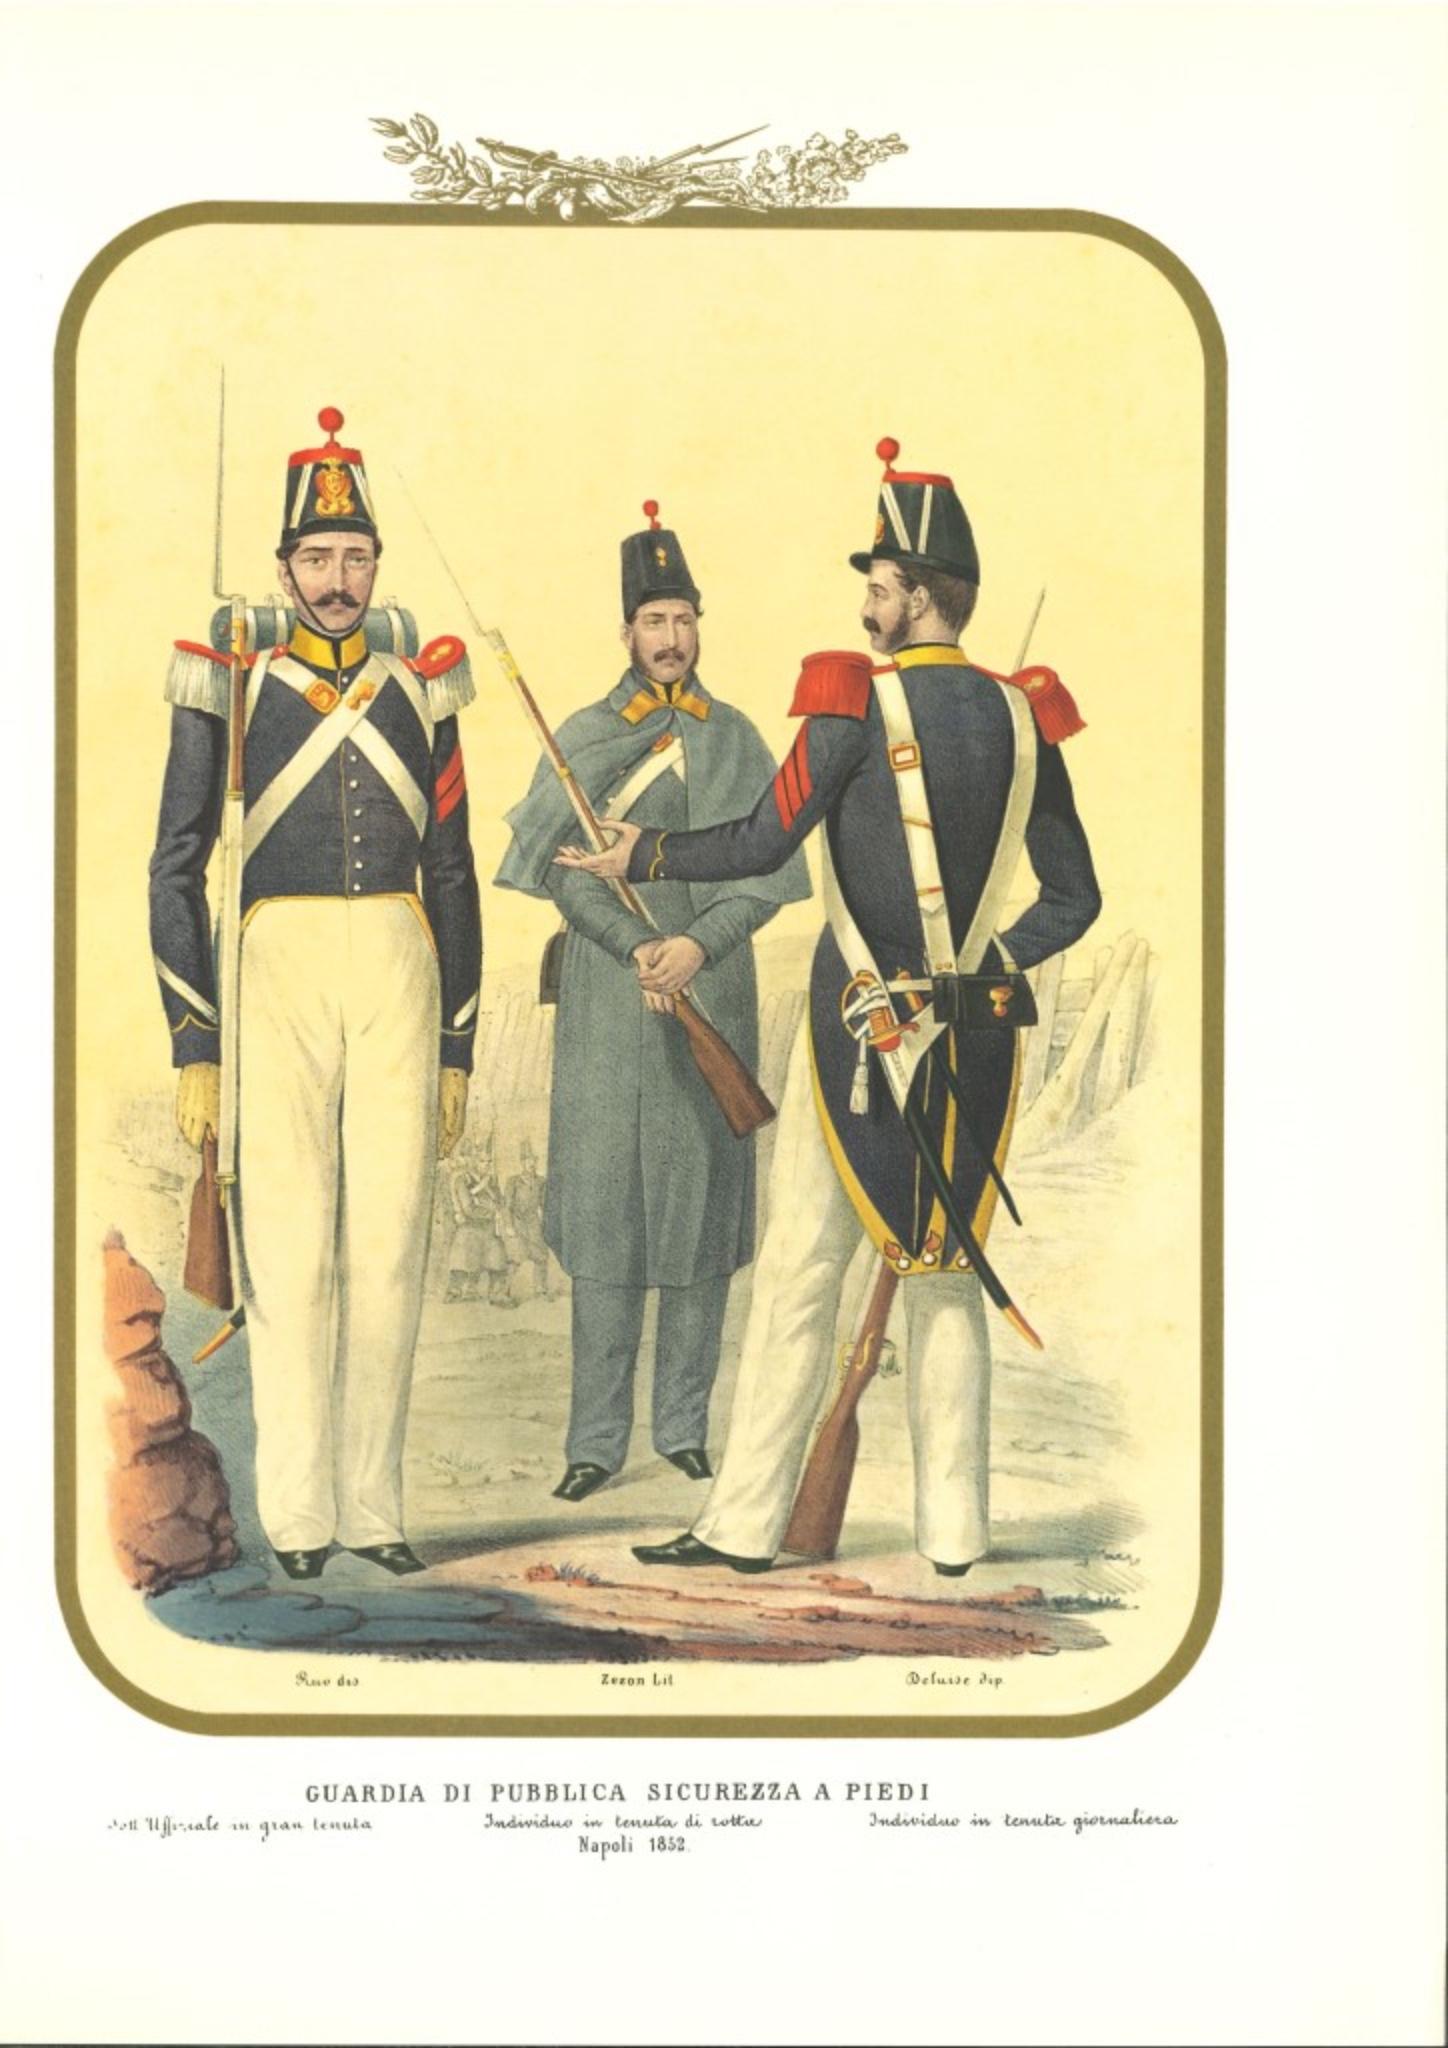 Public Security Guard is a lithograph by Antonio Zezon. Naples 1852.

Interesting colored lithograph which describes some members of the Public Security Guard on Foot: 
Sub-Official in great dress - Individual ready to march - Individual in daily